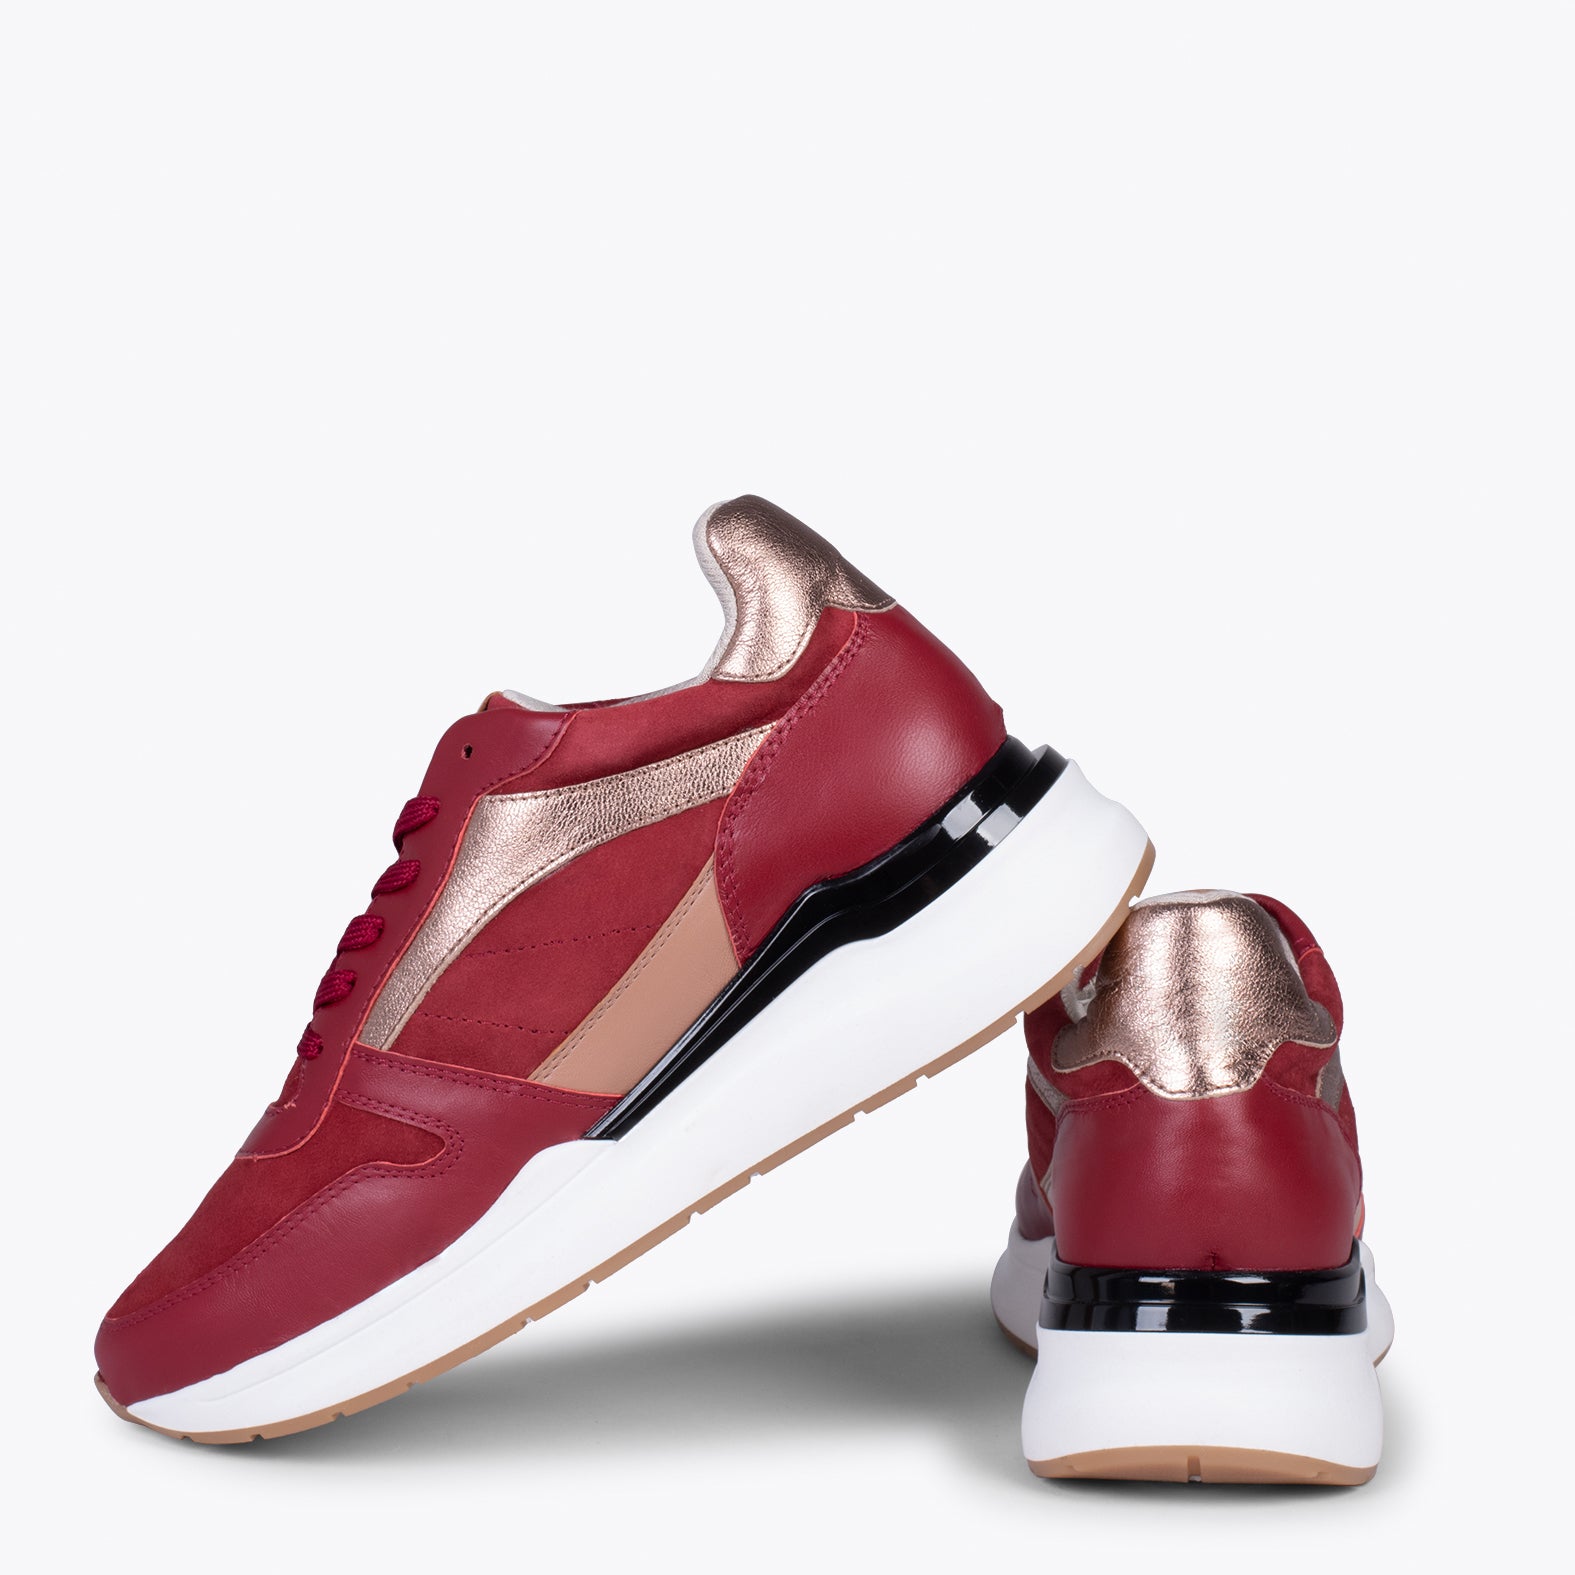 FREEDOM – BURGUNDY sneakers with removable insole